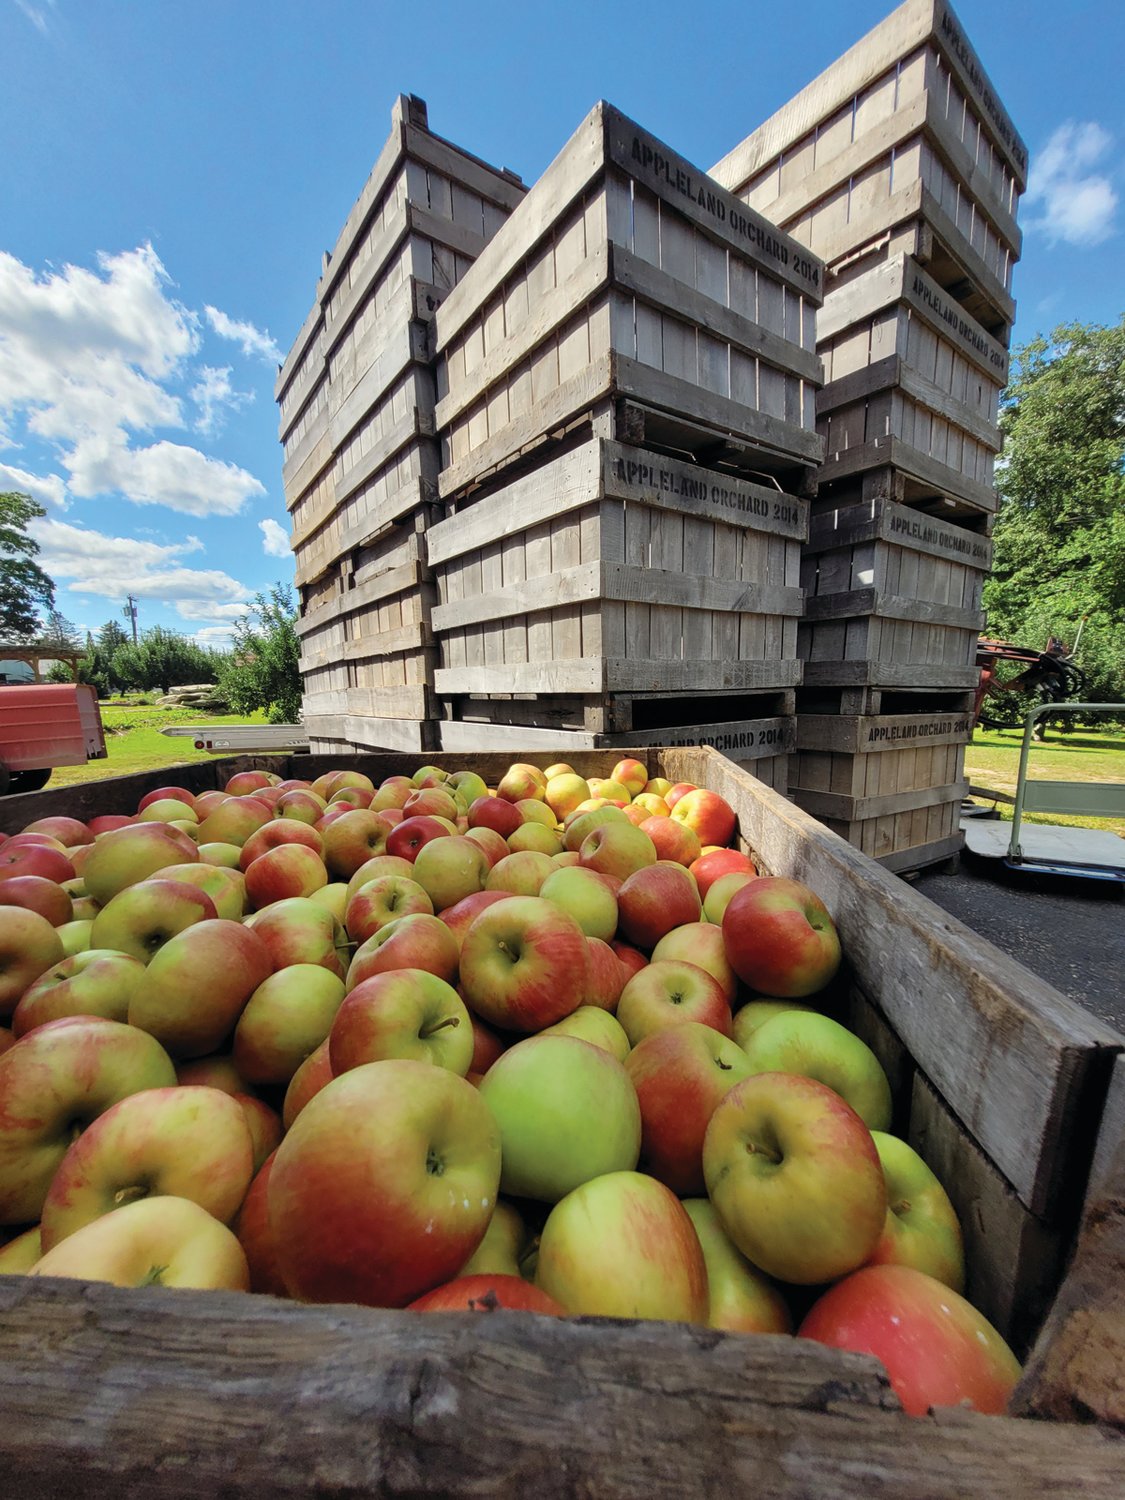 FULL CRATES: Crates of honey crisp apples are ready for eating at Appleland Orchard in Smithfield. Appleland will be bringing fruit and apple treats to this year’s Apple Festival in Johnston.